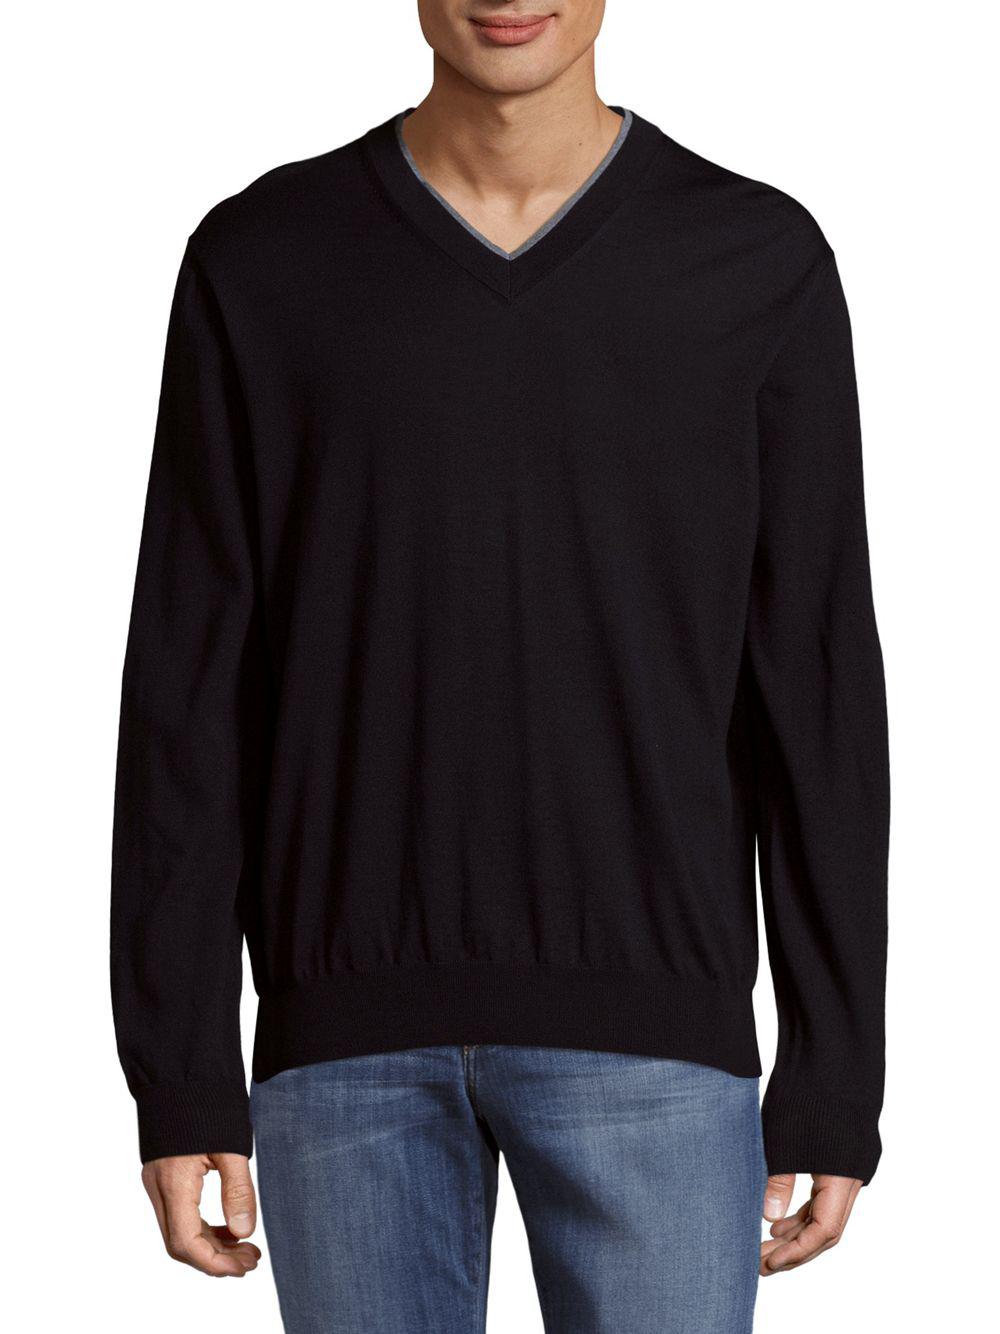 Canali Casual V-neck Wool Sweatshirt in Blue for Men - Lyst